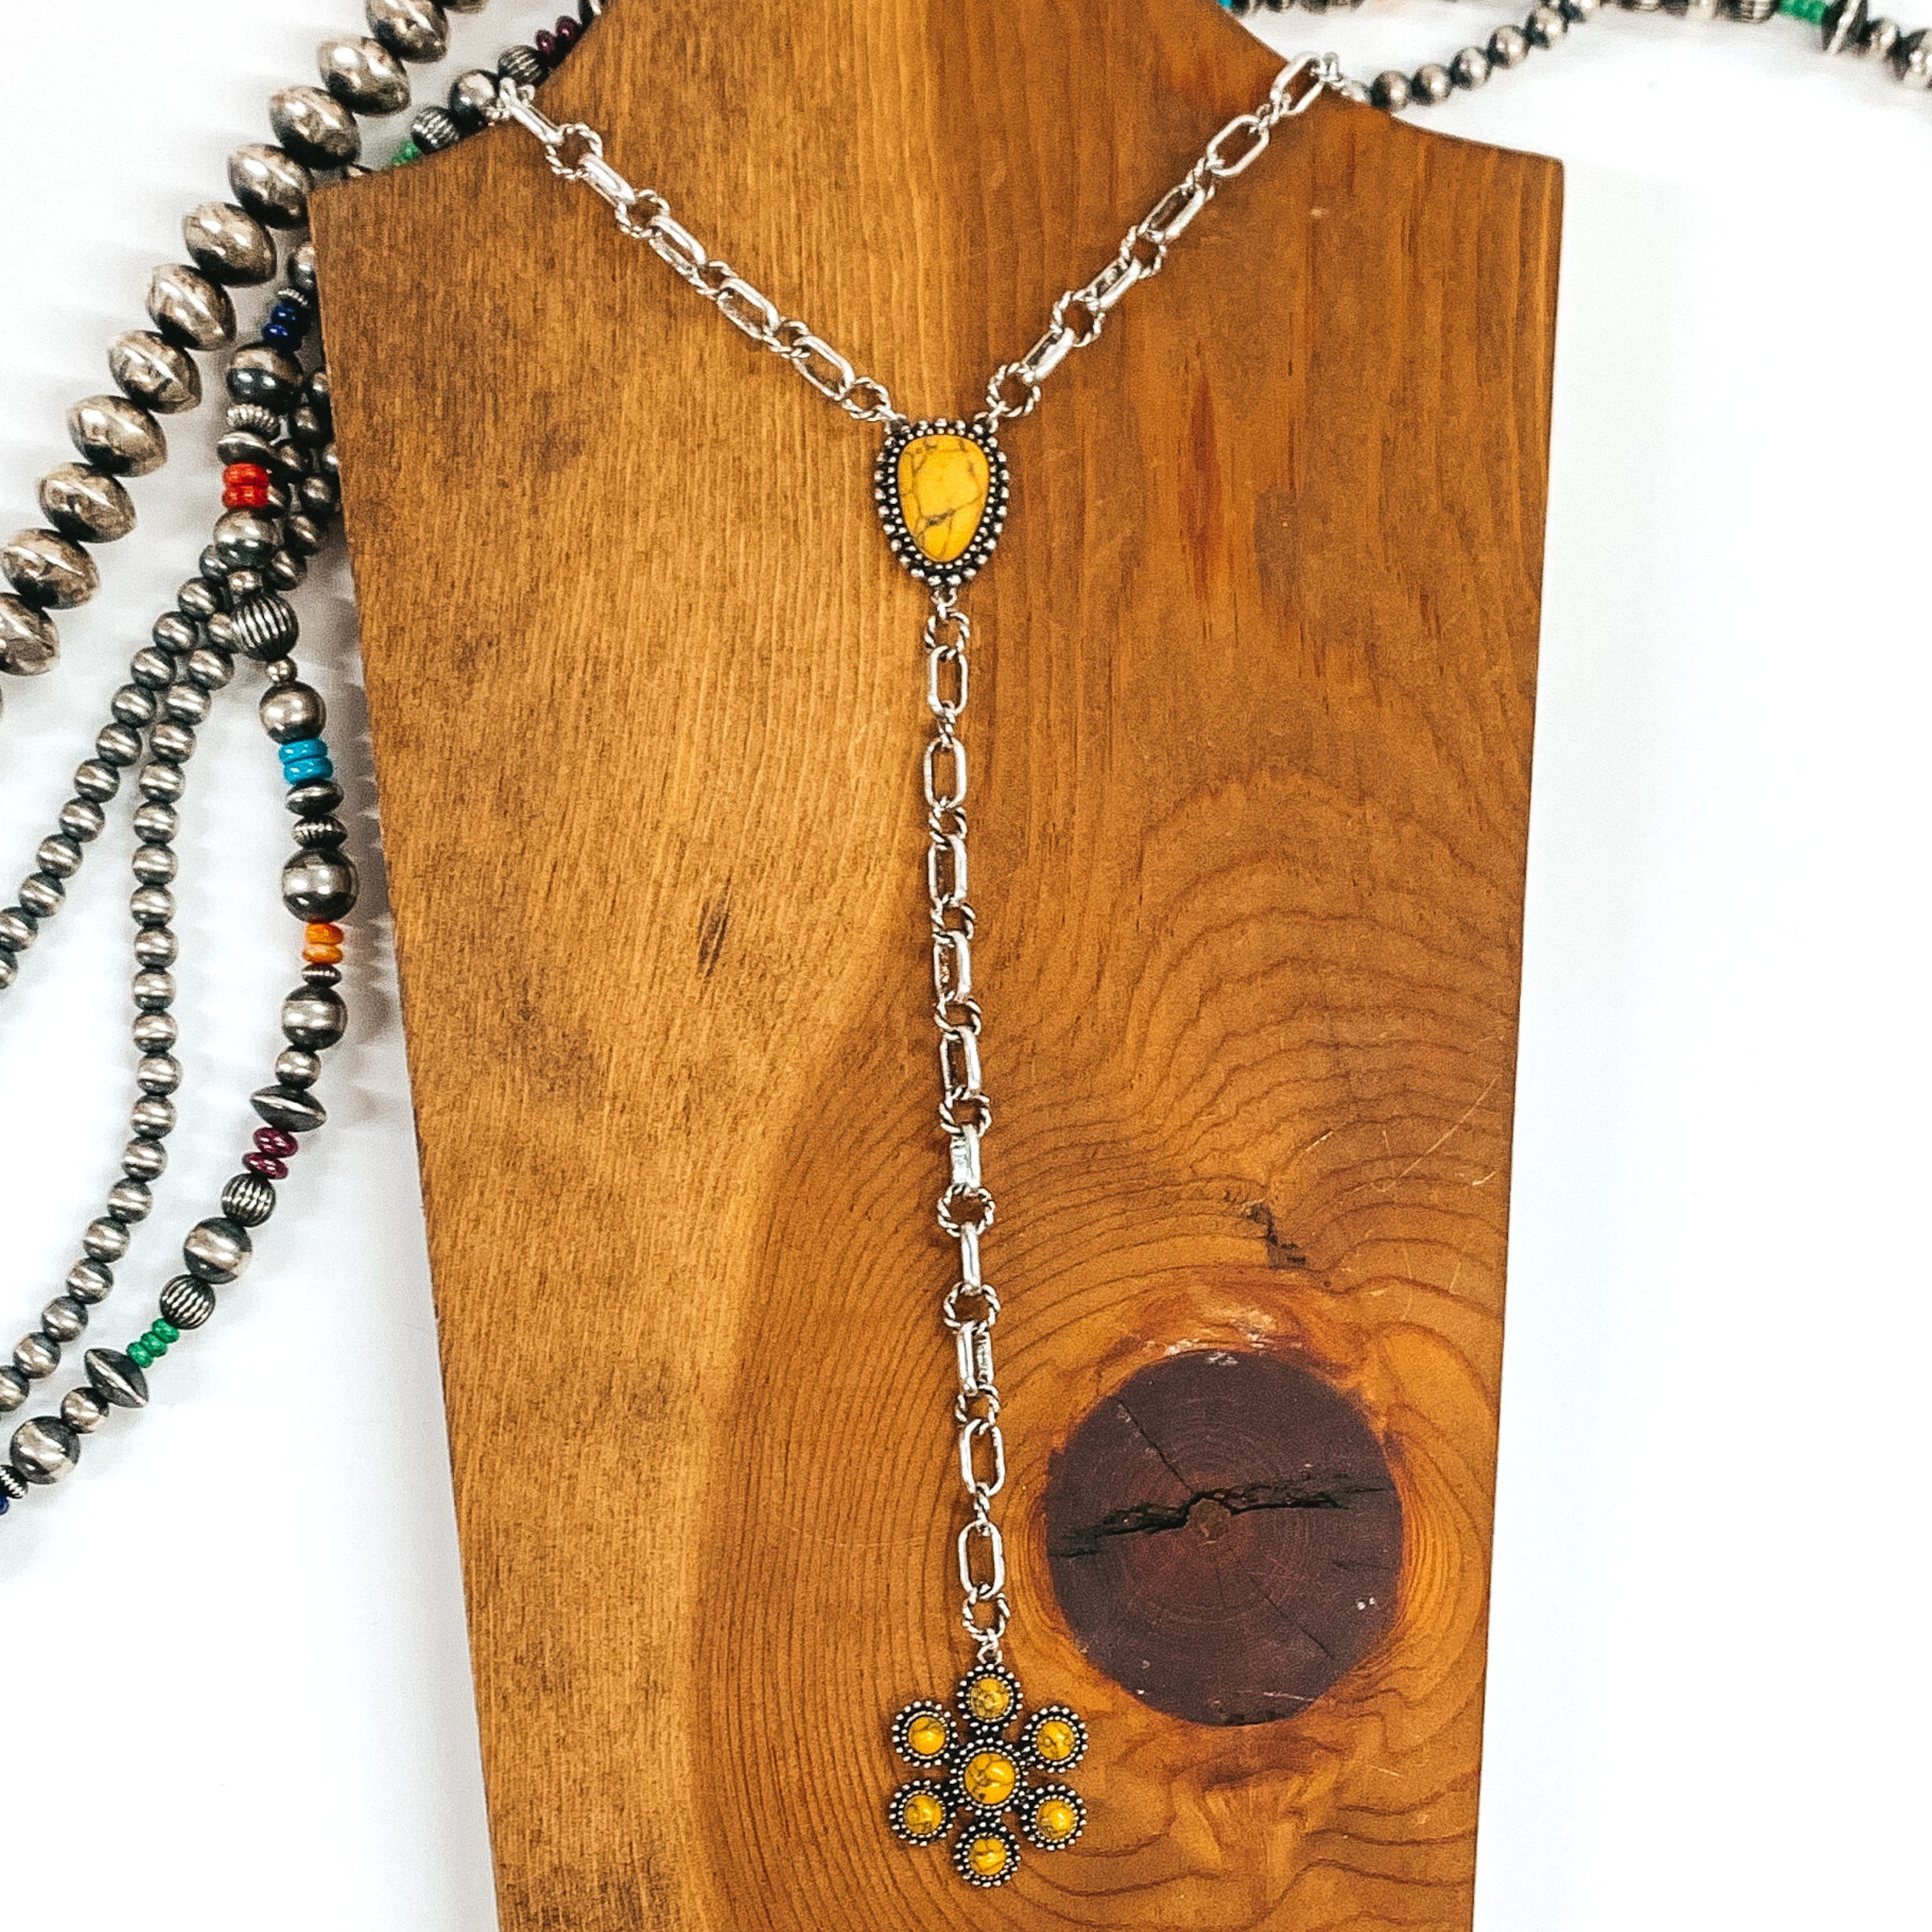 Silver chained necklace that is Navajo inspired with  an yellow irregular stoned pendant. Then hanging from the pendant, there is a hanging silver chain with a star burst pendant with yellow stones. This necklace is pictured on  wood necklace holder on a white background. It has different shaped and colored Navajo strands. 